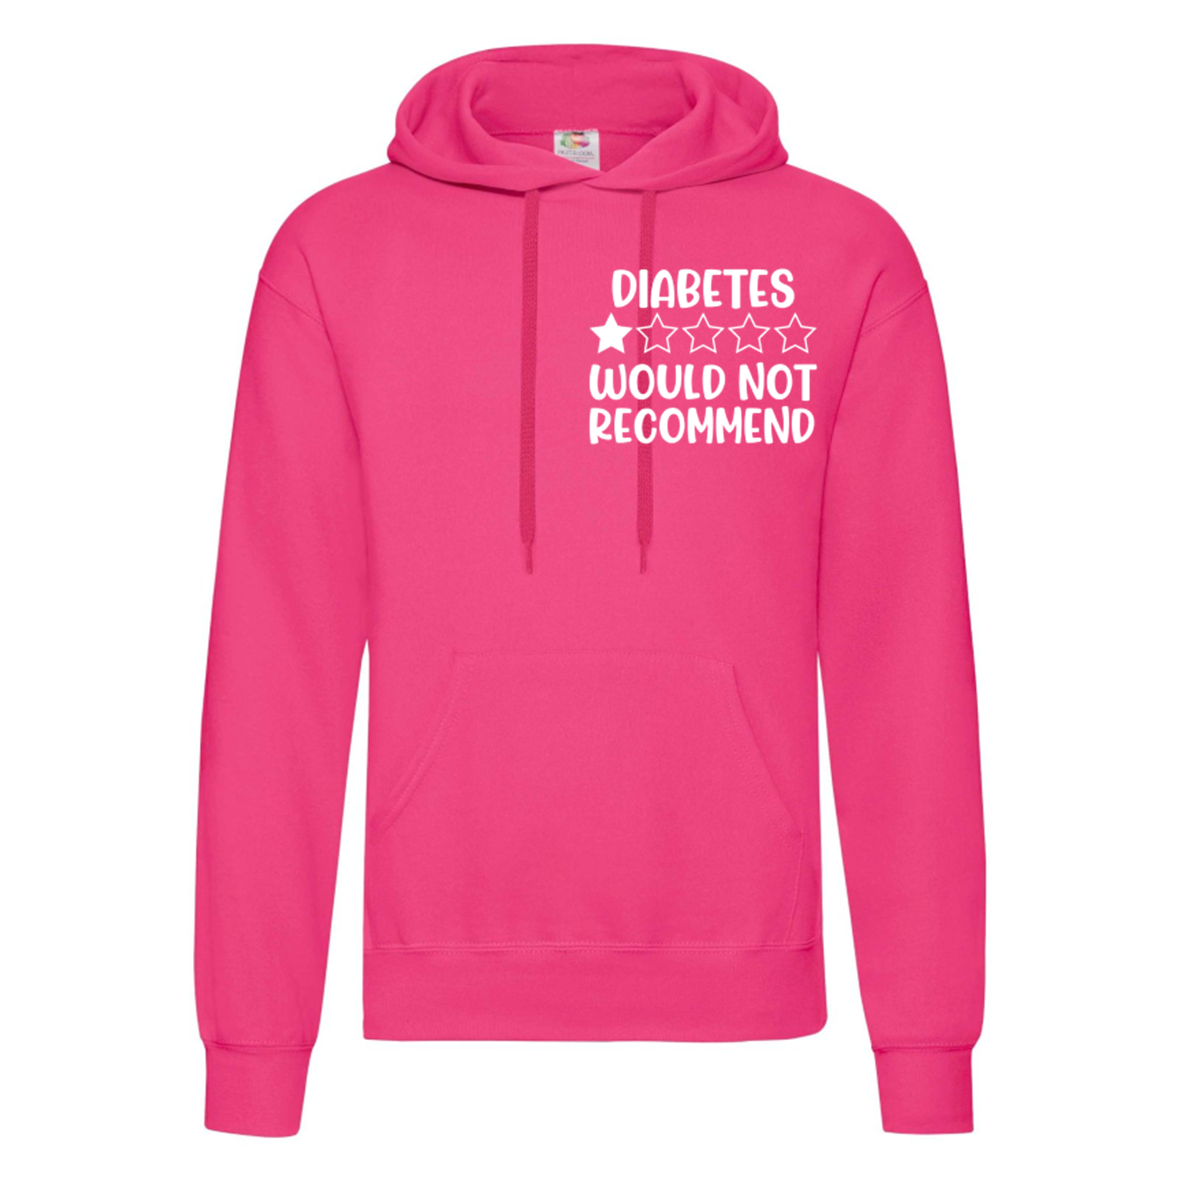 Diabetes * Would Not Recommend Hoodie